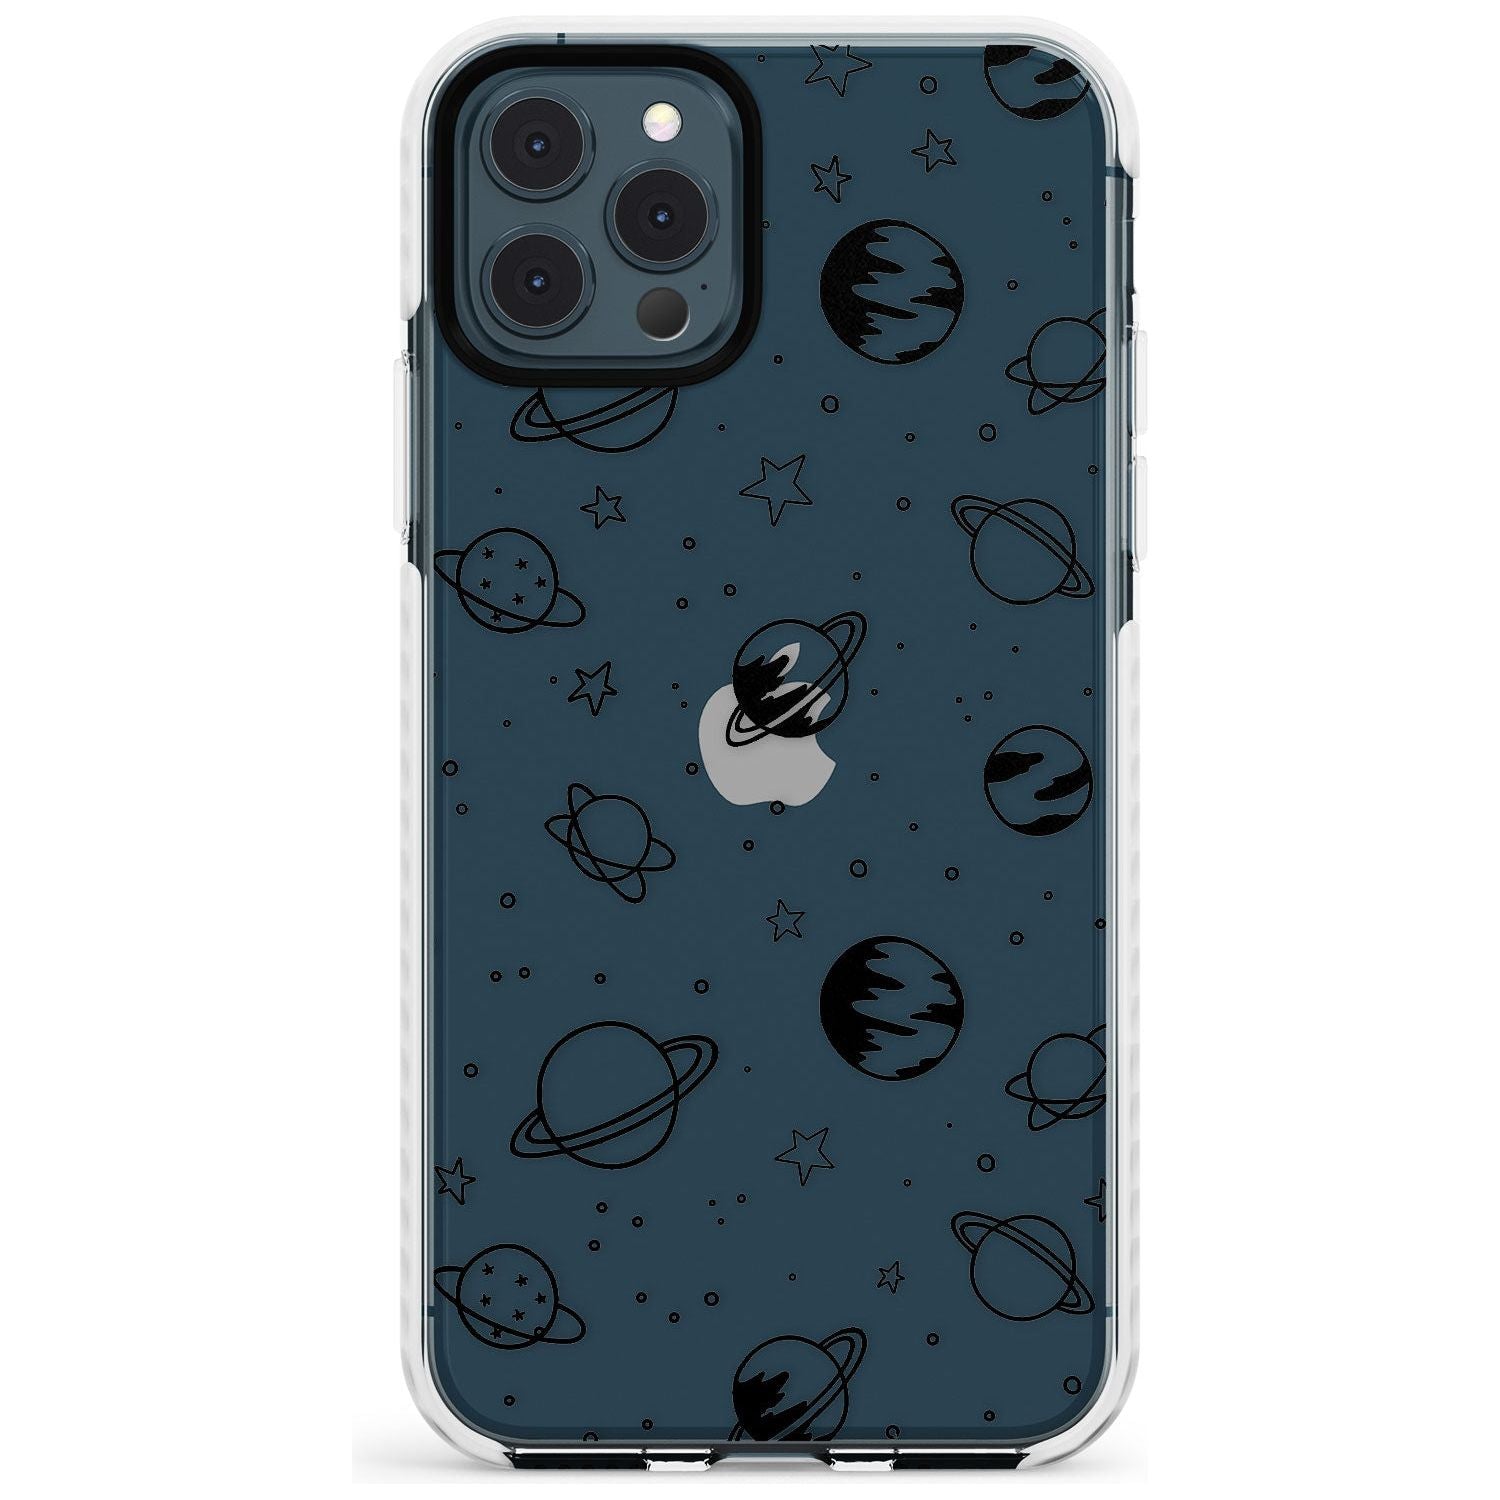 Outer Space Outlines: Black on Clear Slim TPU Phone Case for iPhone 11 Pro Max